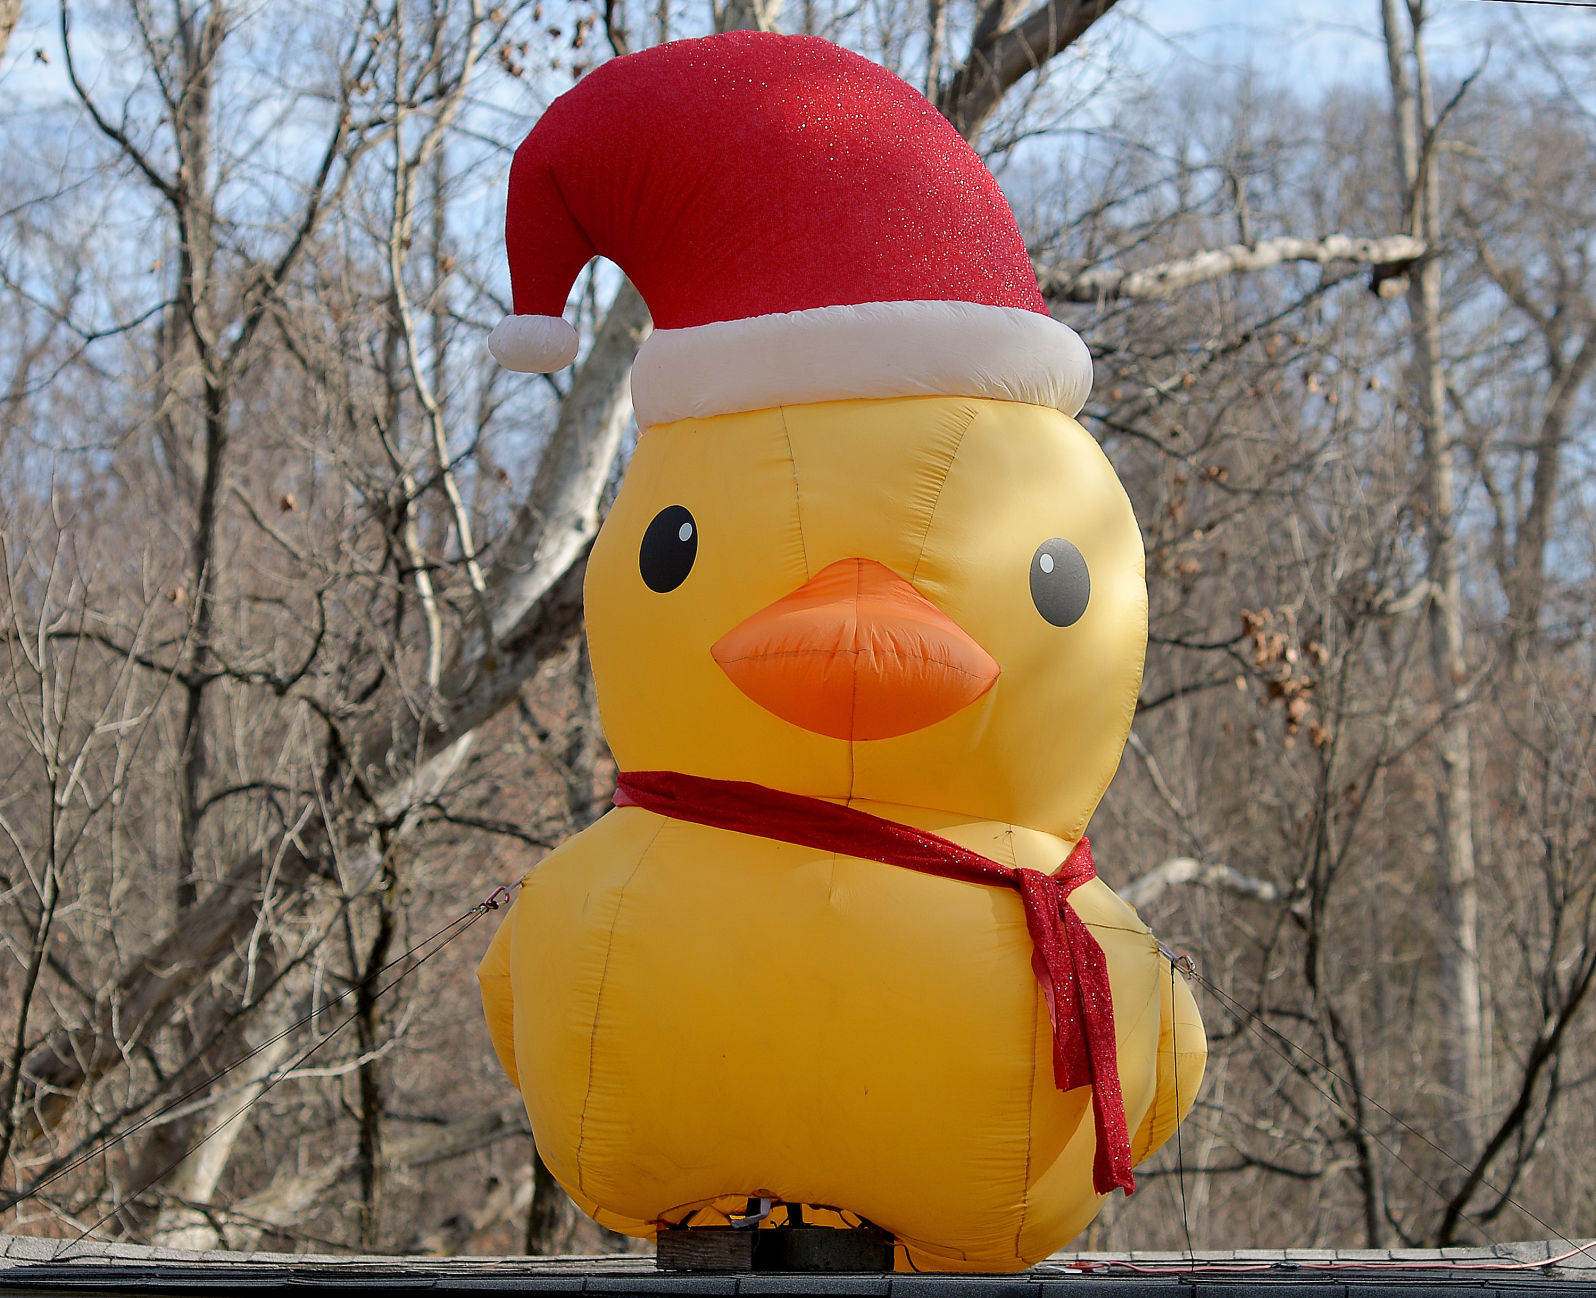 The return of the Weaver Pike Christmas duck